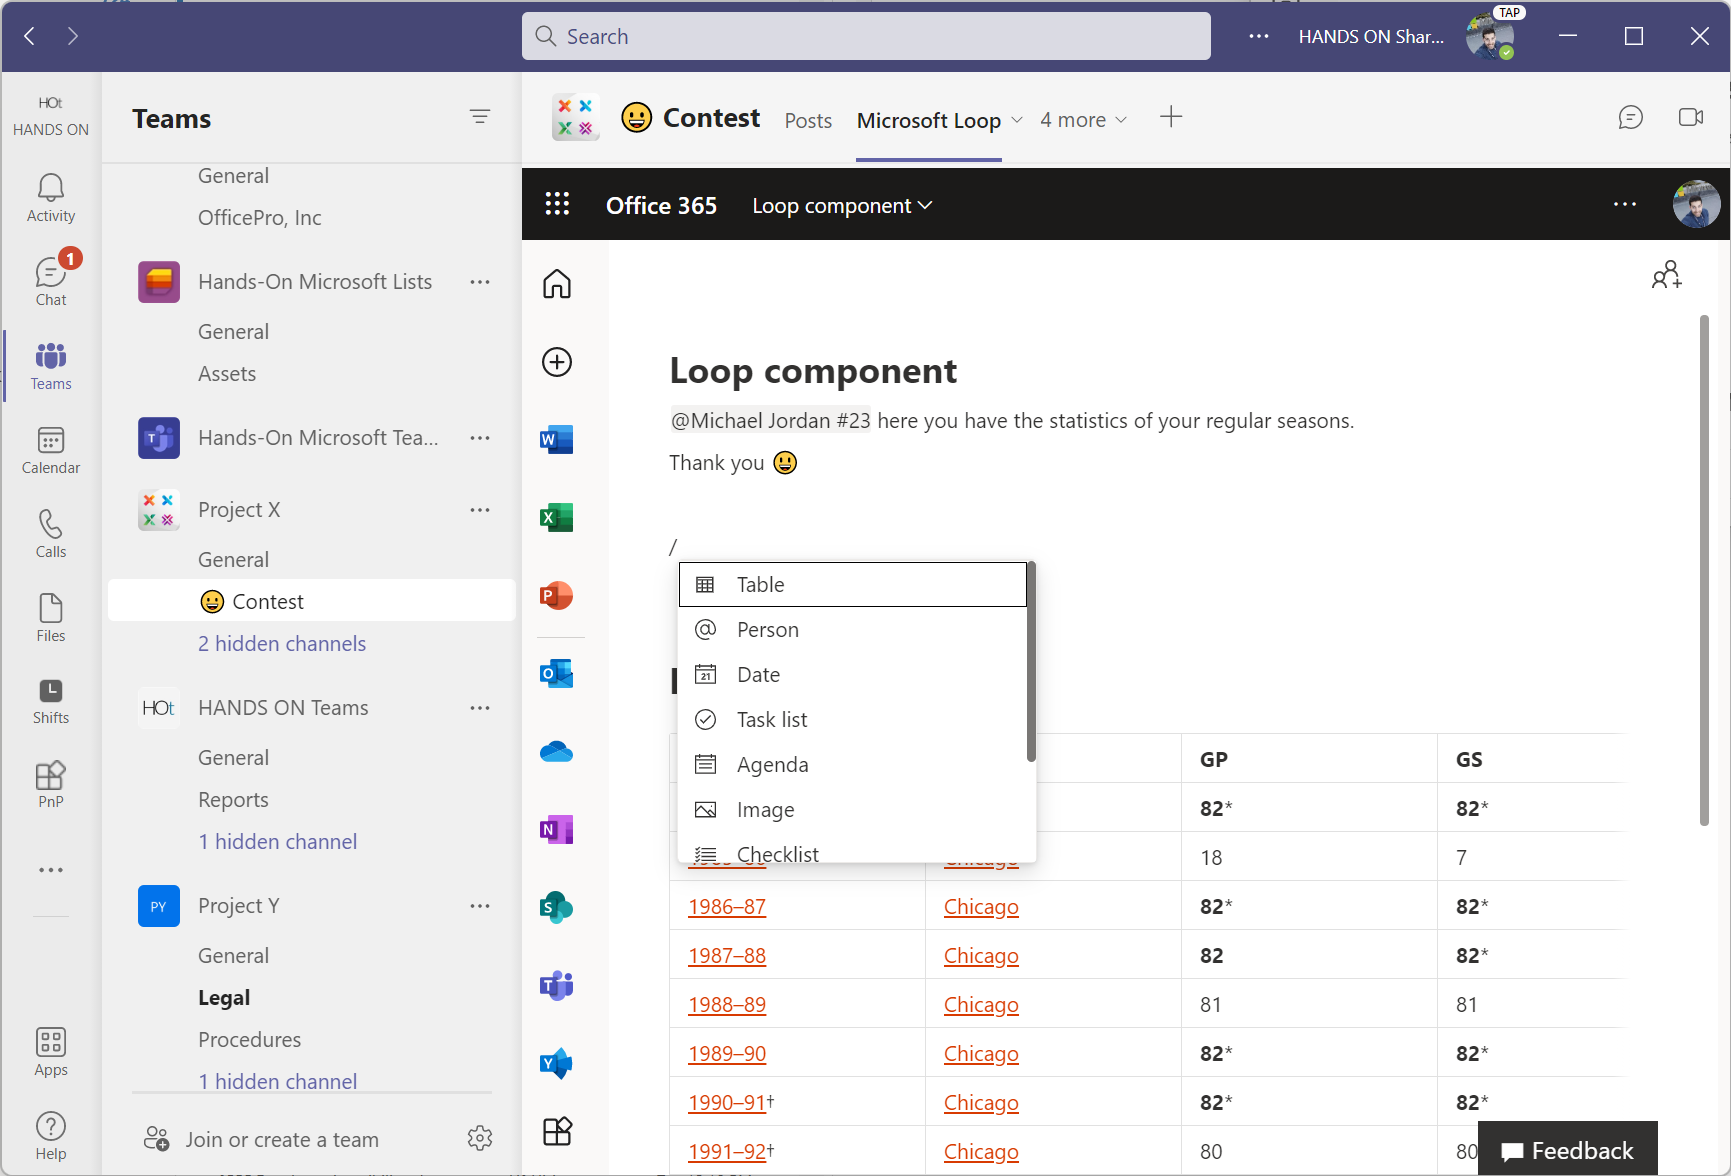 How to add a Microsoft Loop Pages to a team in Microsoft Teams HANDS